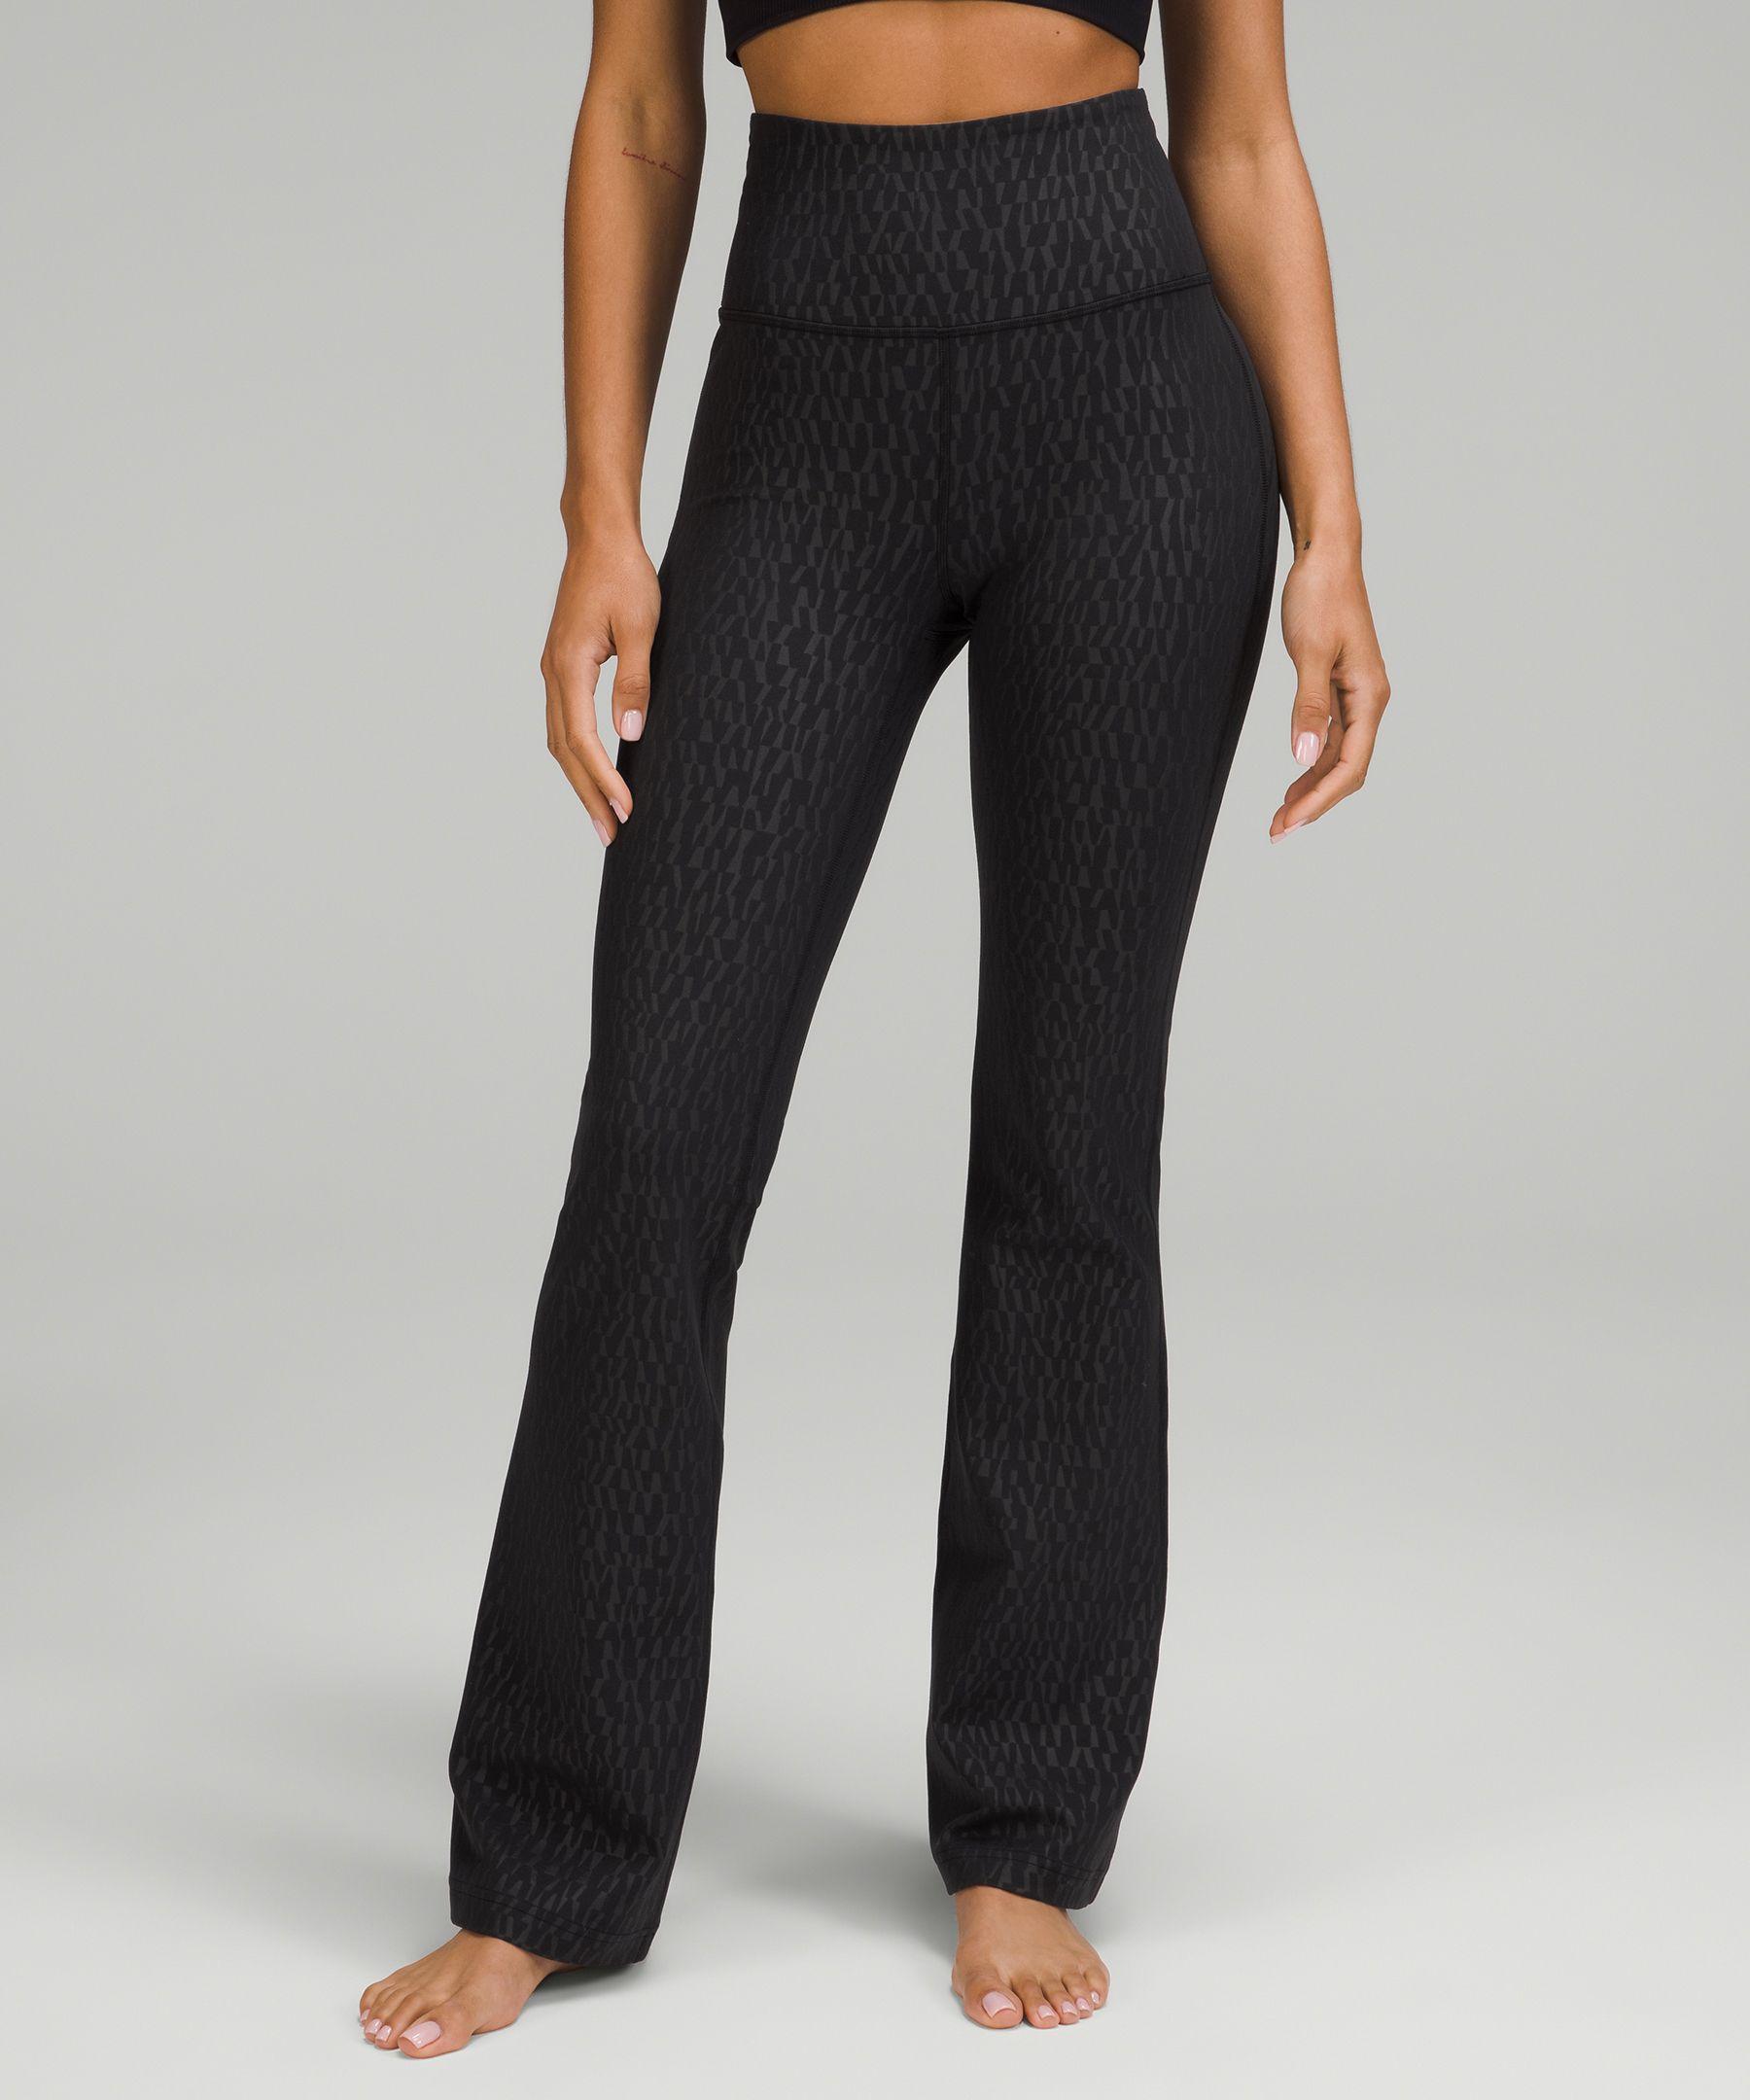 lululemon athletica Groove Super-high-rise Flared Pant Nulu in